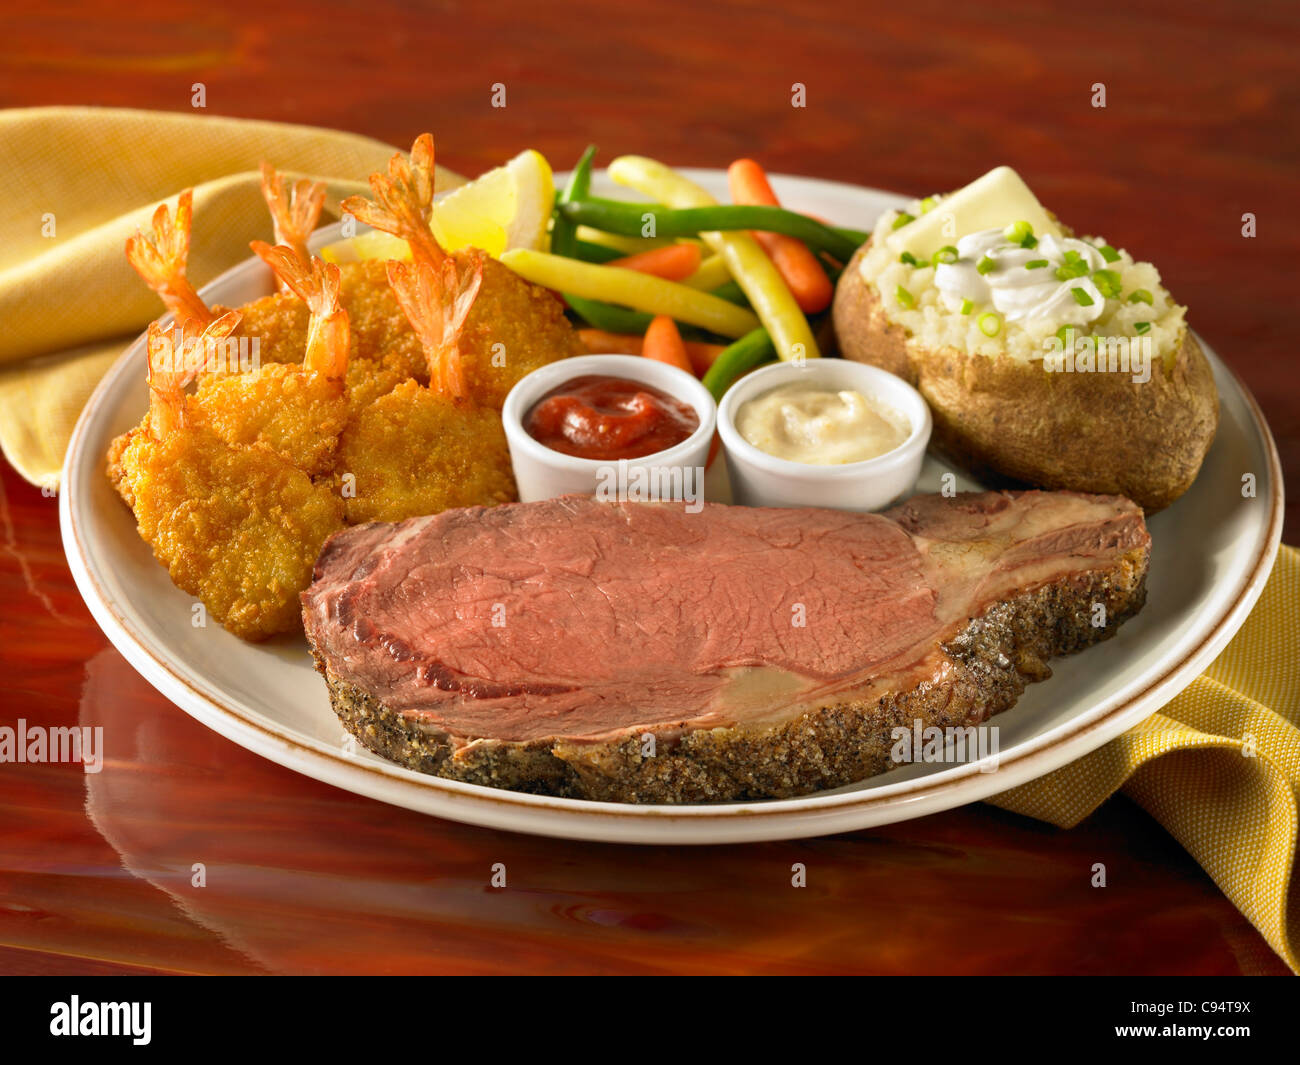 Prime rib and shrimp dinner with loaded stuffed potato and vegetable Stock Photo